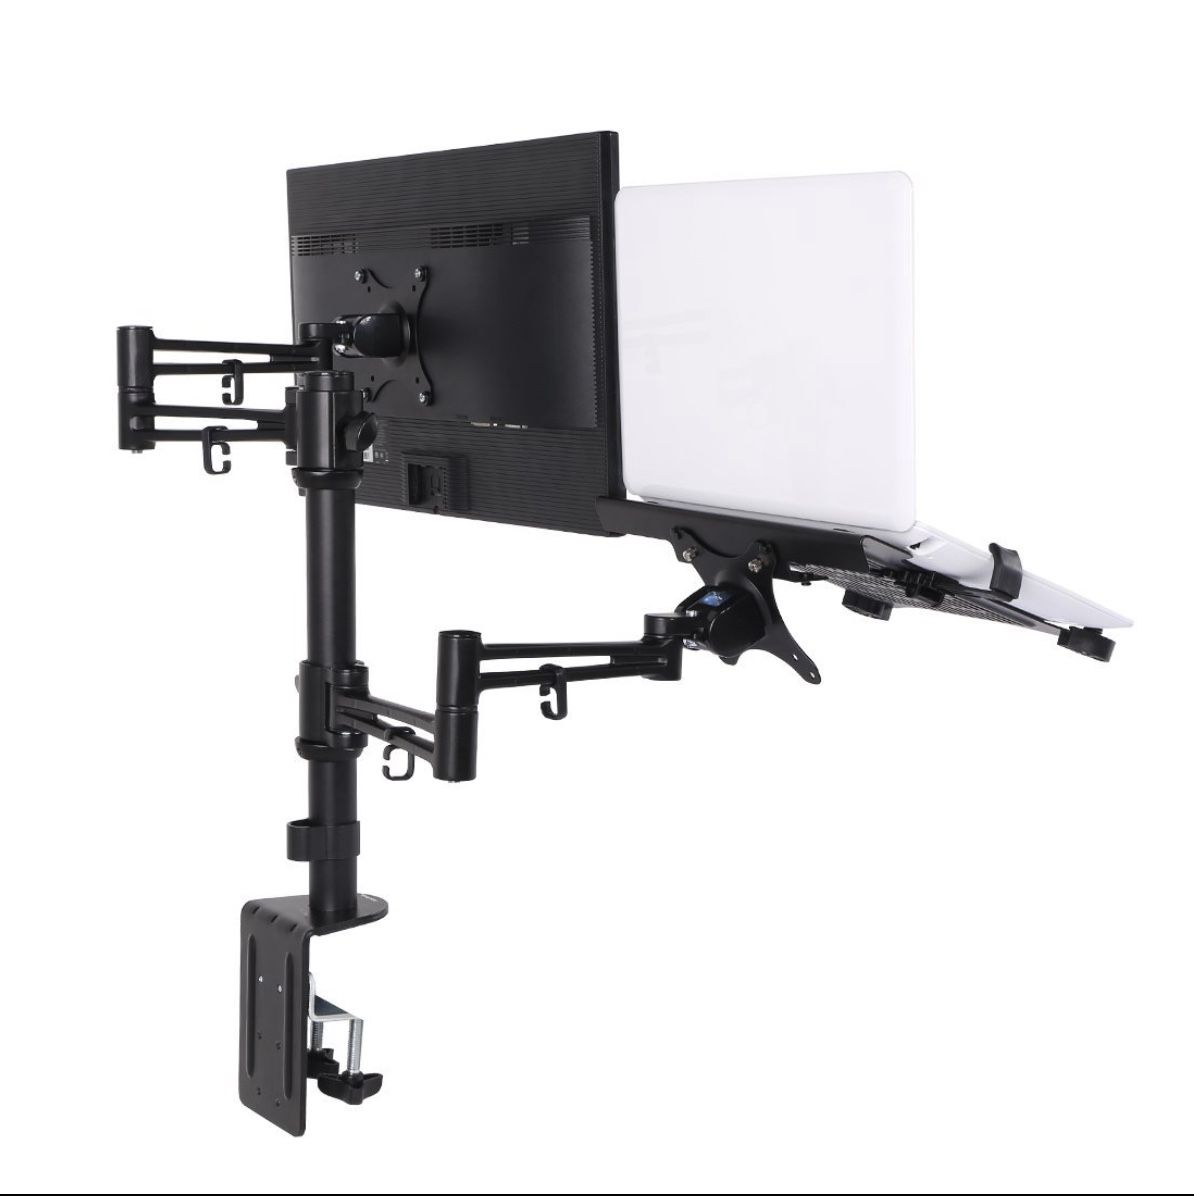 Loctek D2DL 2 in 1 Dual Monitor Arm Desk Mount Stand for 10-27″ & 11-15.6″ LCD